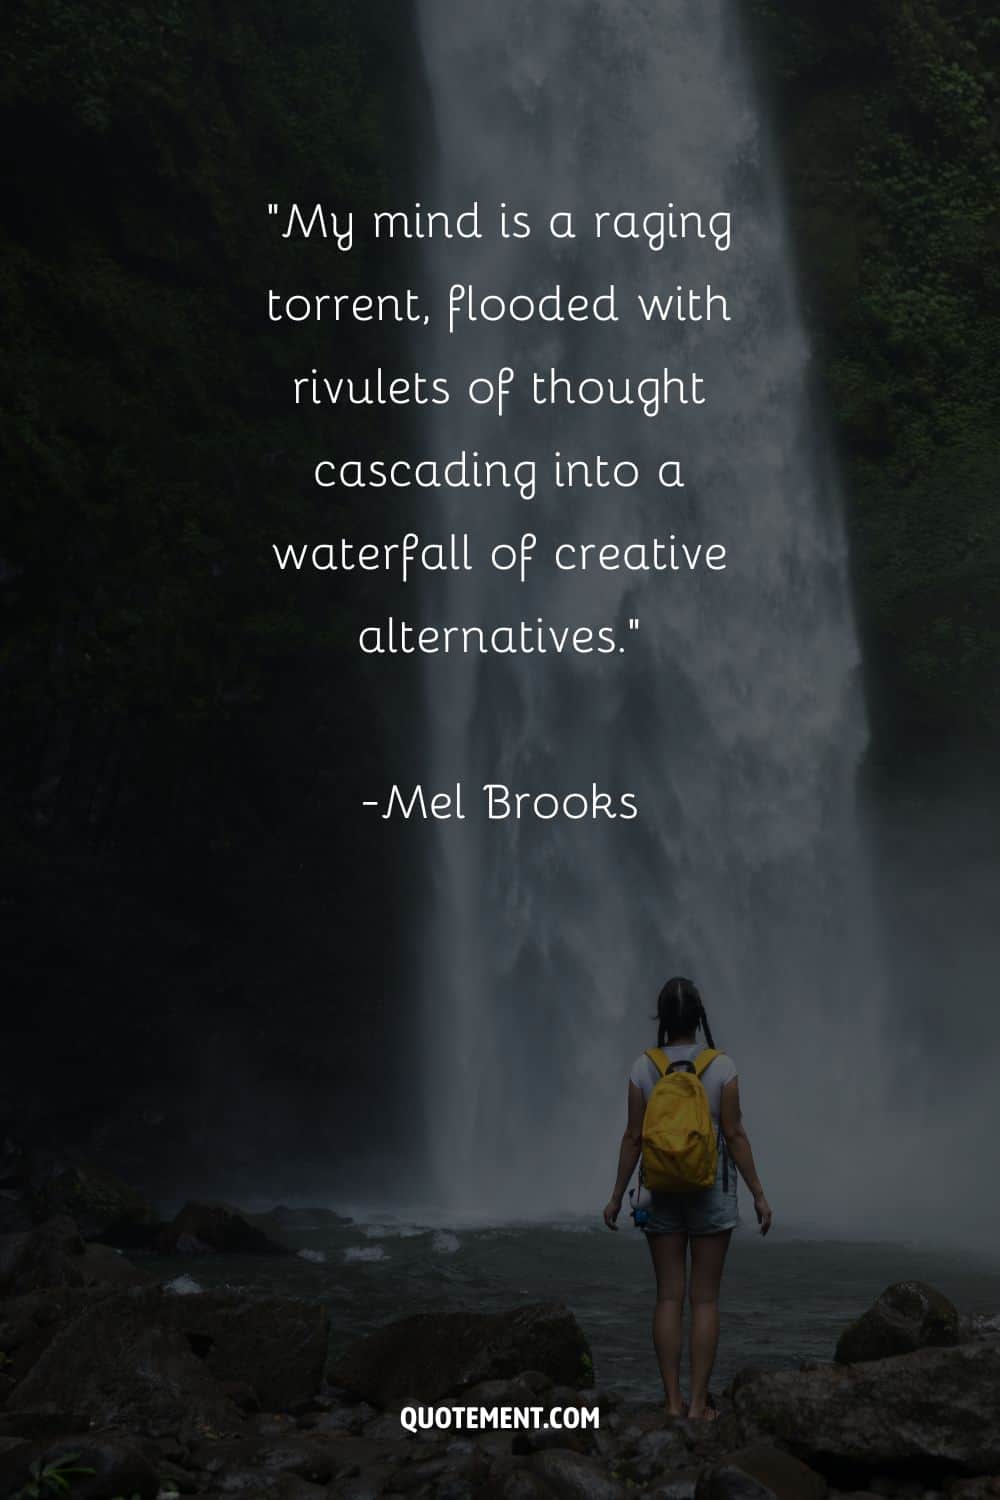 Amazing quote by Mel Brooks and a woman by the waterfall in the background
